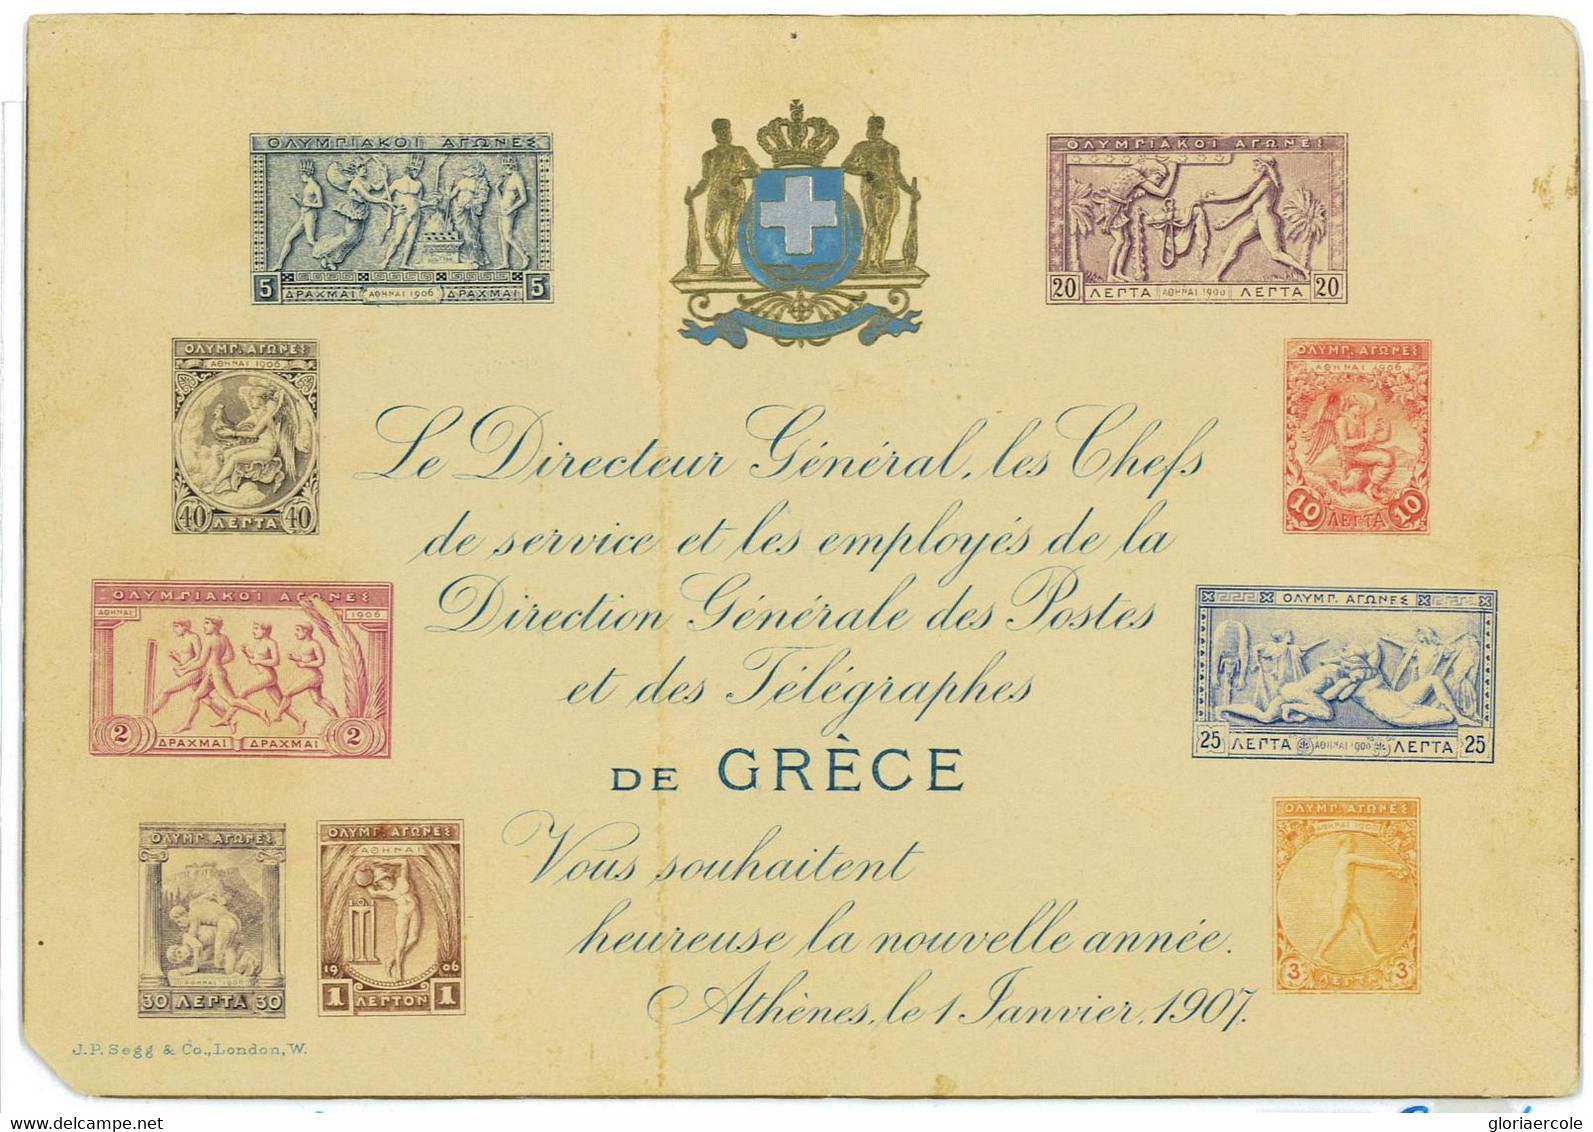 BK1843 - GREECE - POSTAL HISTORY - 1906 Olympic Stamp On OFFICIAL  New Years GREETINGS CARD  1907 - Estate 1896: Atene